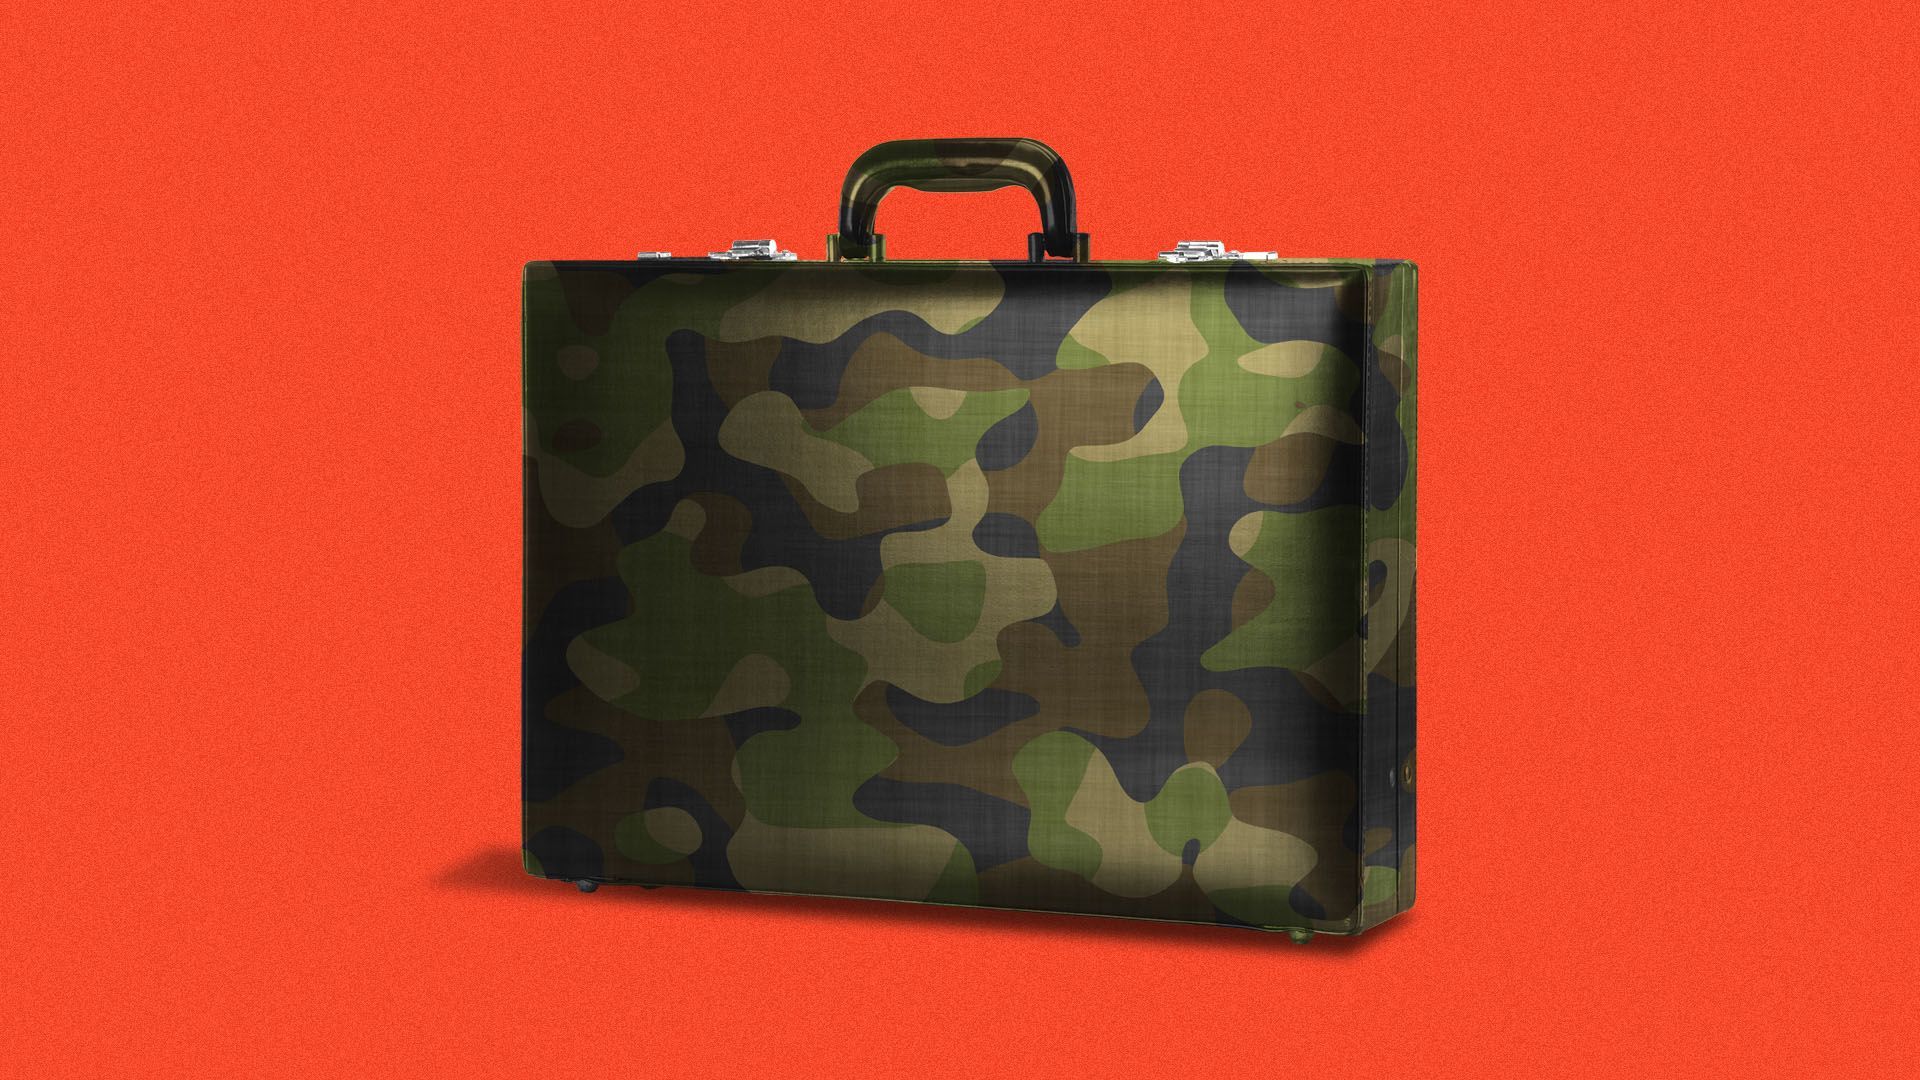 A briefcase covered in camouflage print, on a red background.